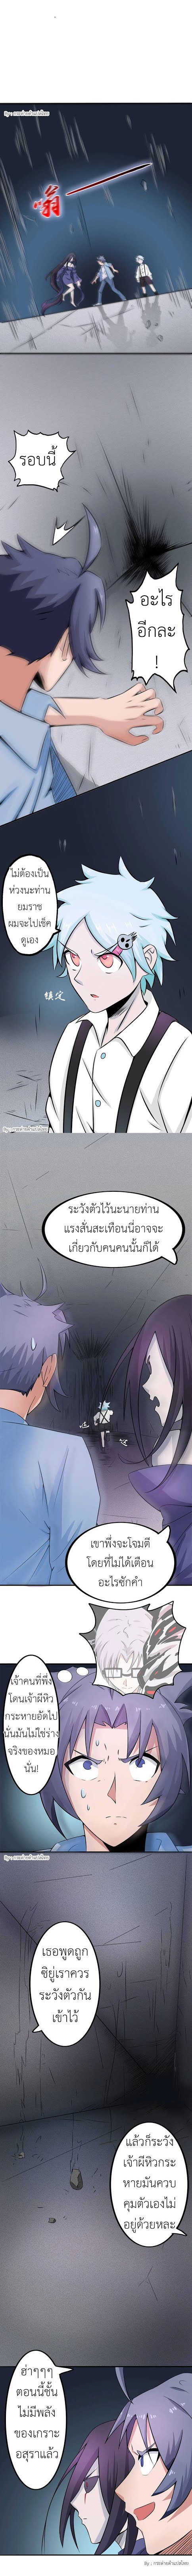 Yama of the Hell - หน้า 21